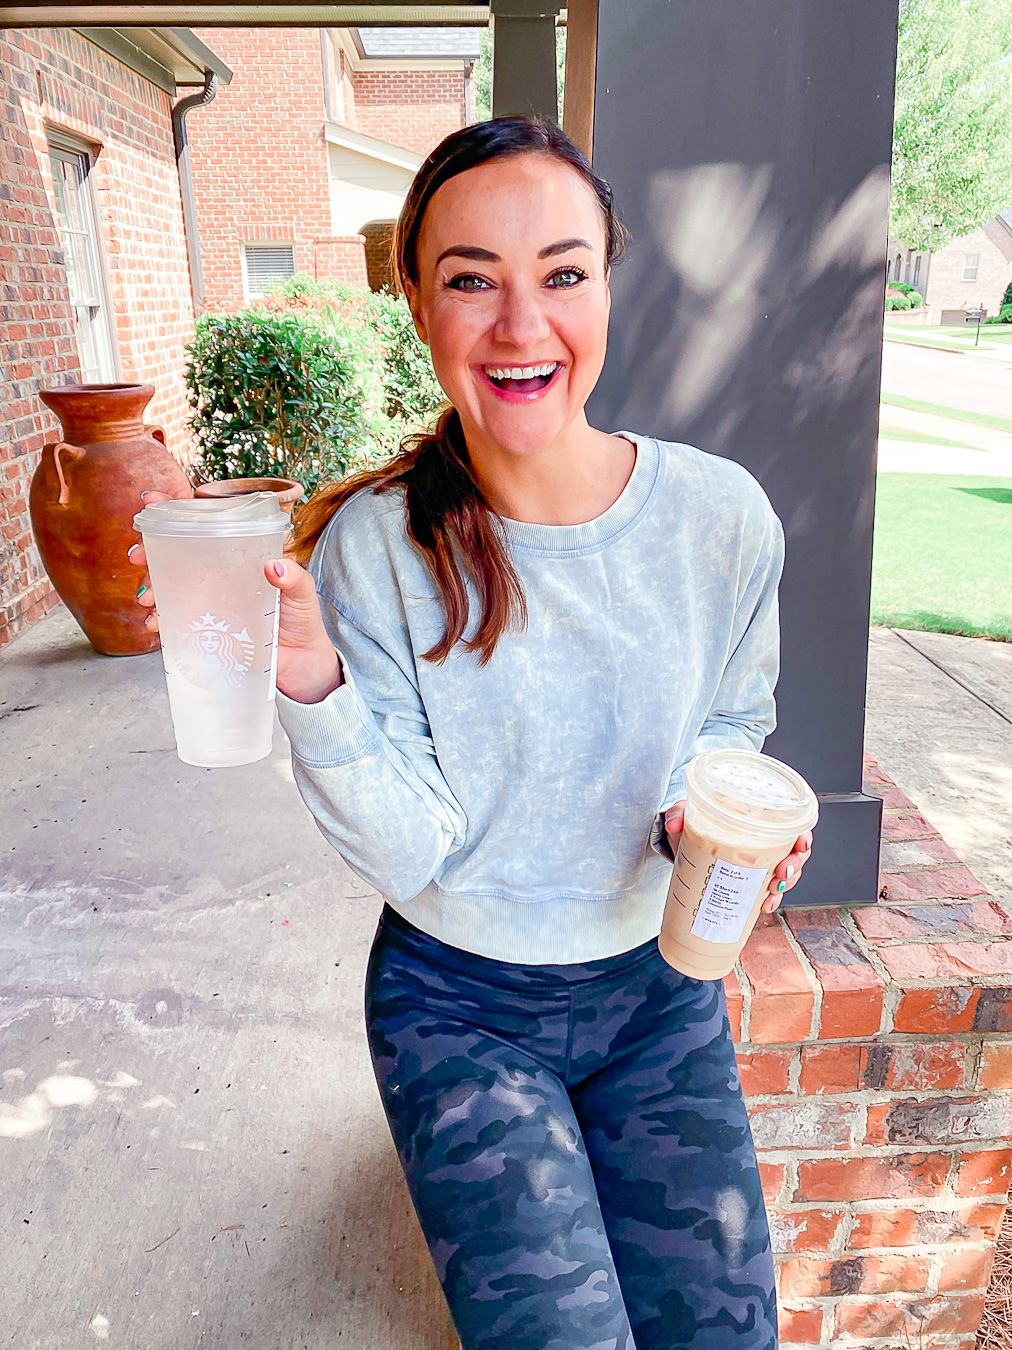 Top 5 Starbucks Low Carb Drinks To Enjoy This Fall by Alabama Food + Lifestyle blogger, My Life Well Loved